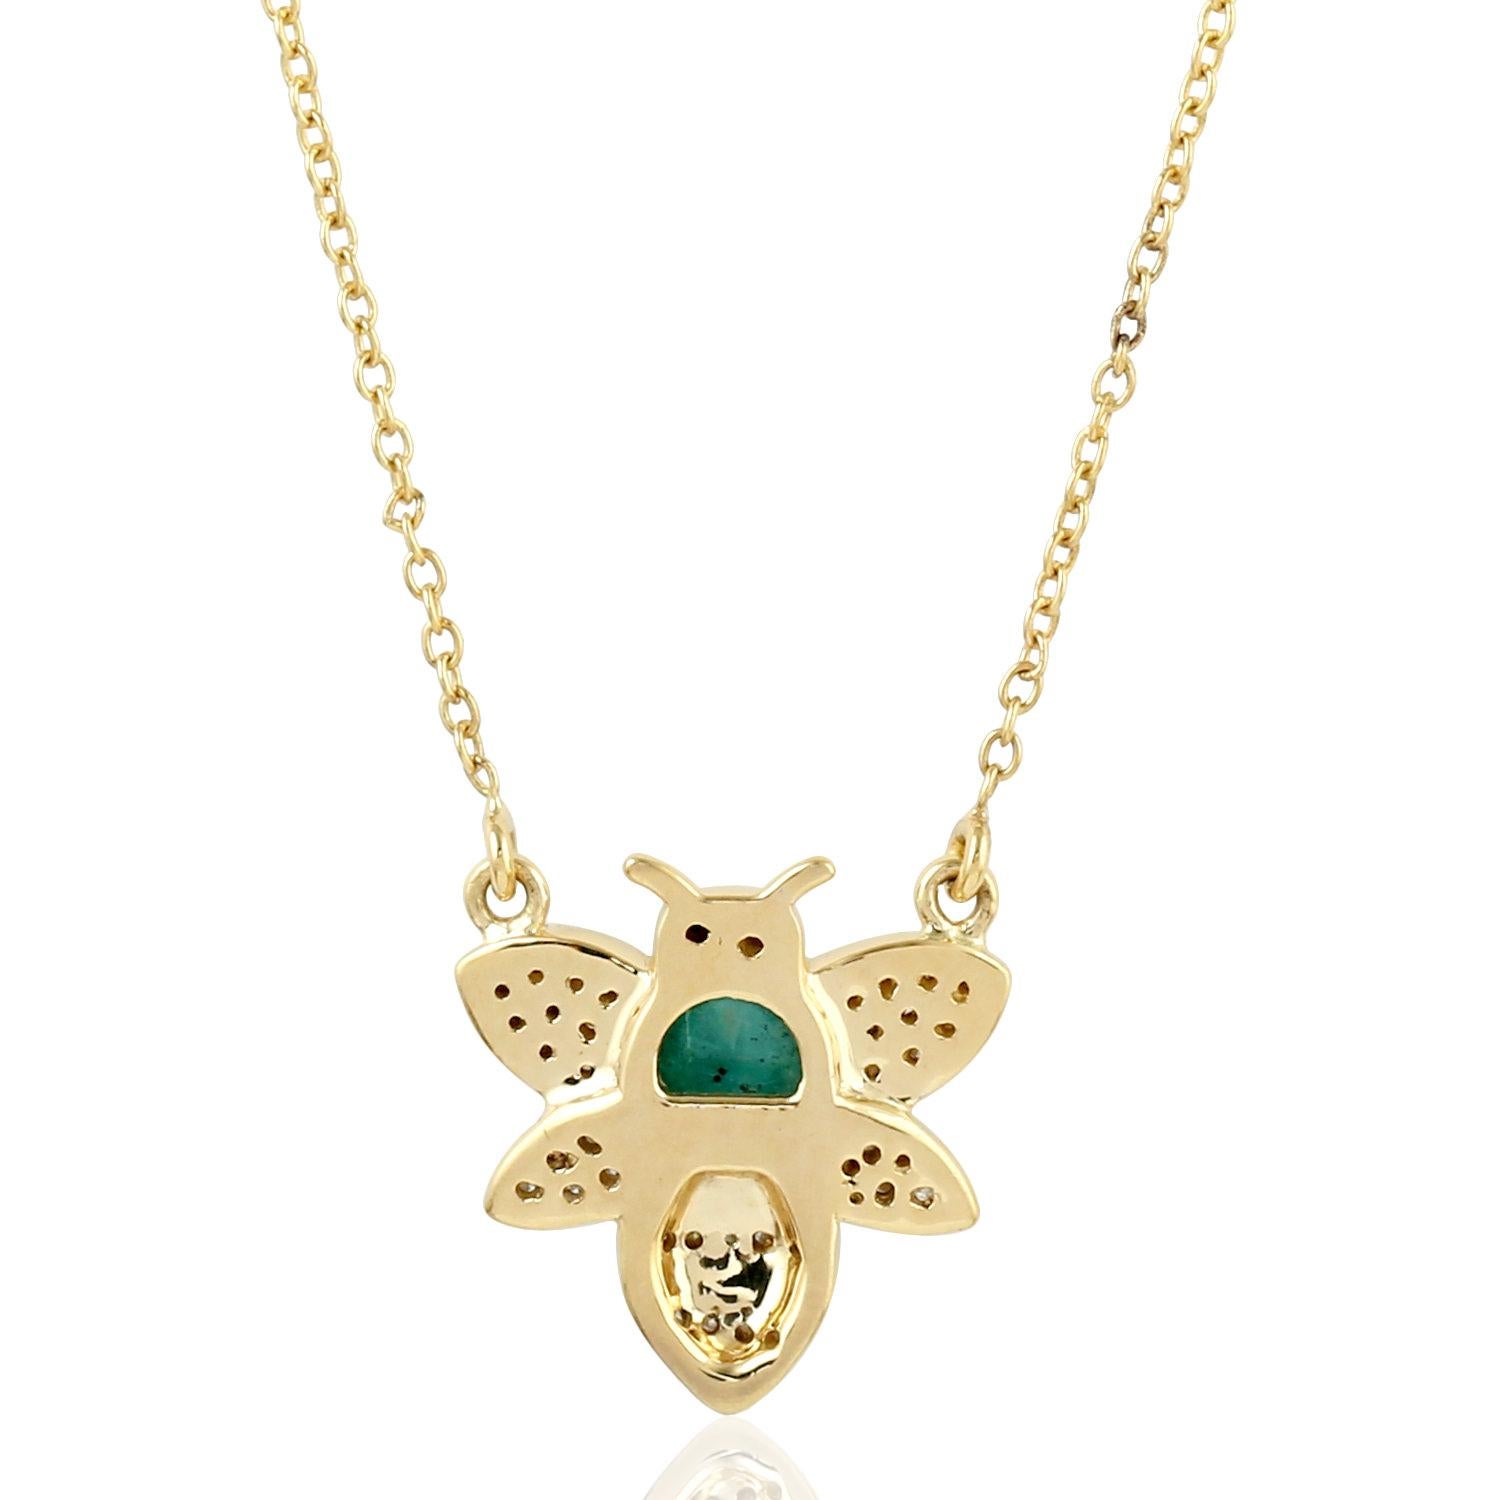 This bumble bee necklace has been meticulously crafted from 18-karat yellow gold.  It is set with .30 carats emerald & .20 carats pave diamonds. See other matching piece that compliments with Bee Collection.

FOLLOW  MEGHNA JEWELS storefront to view